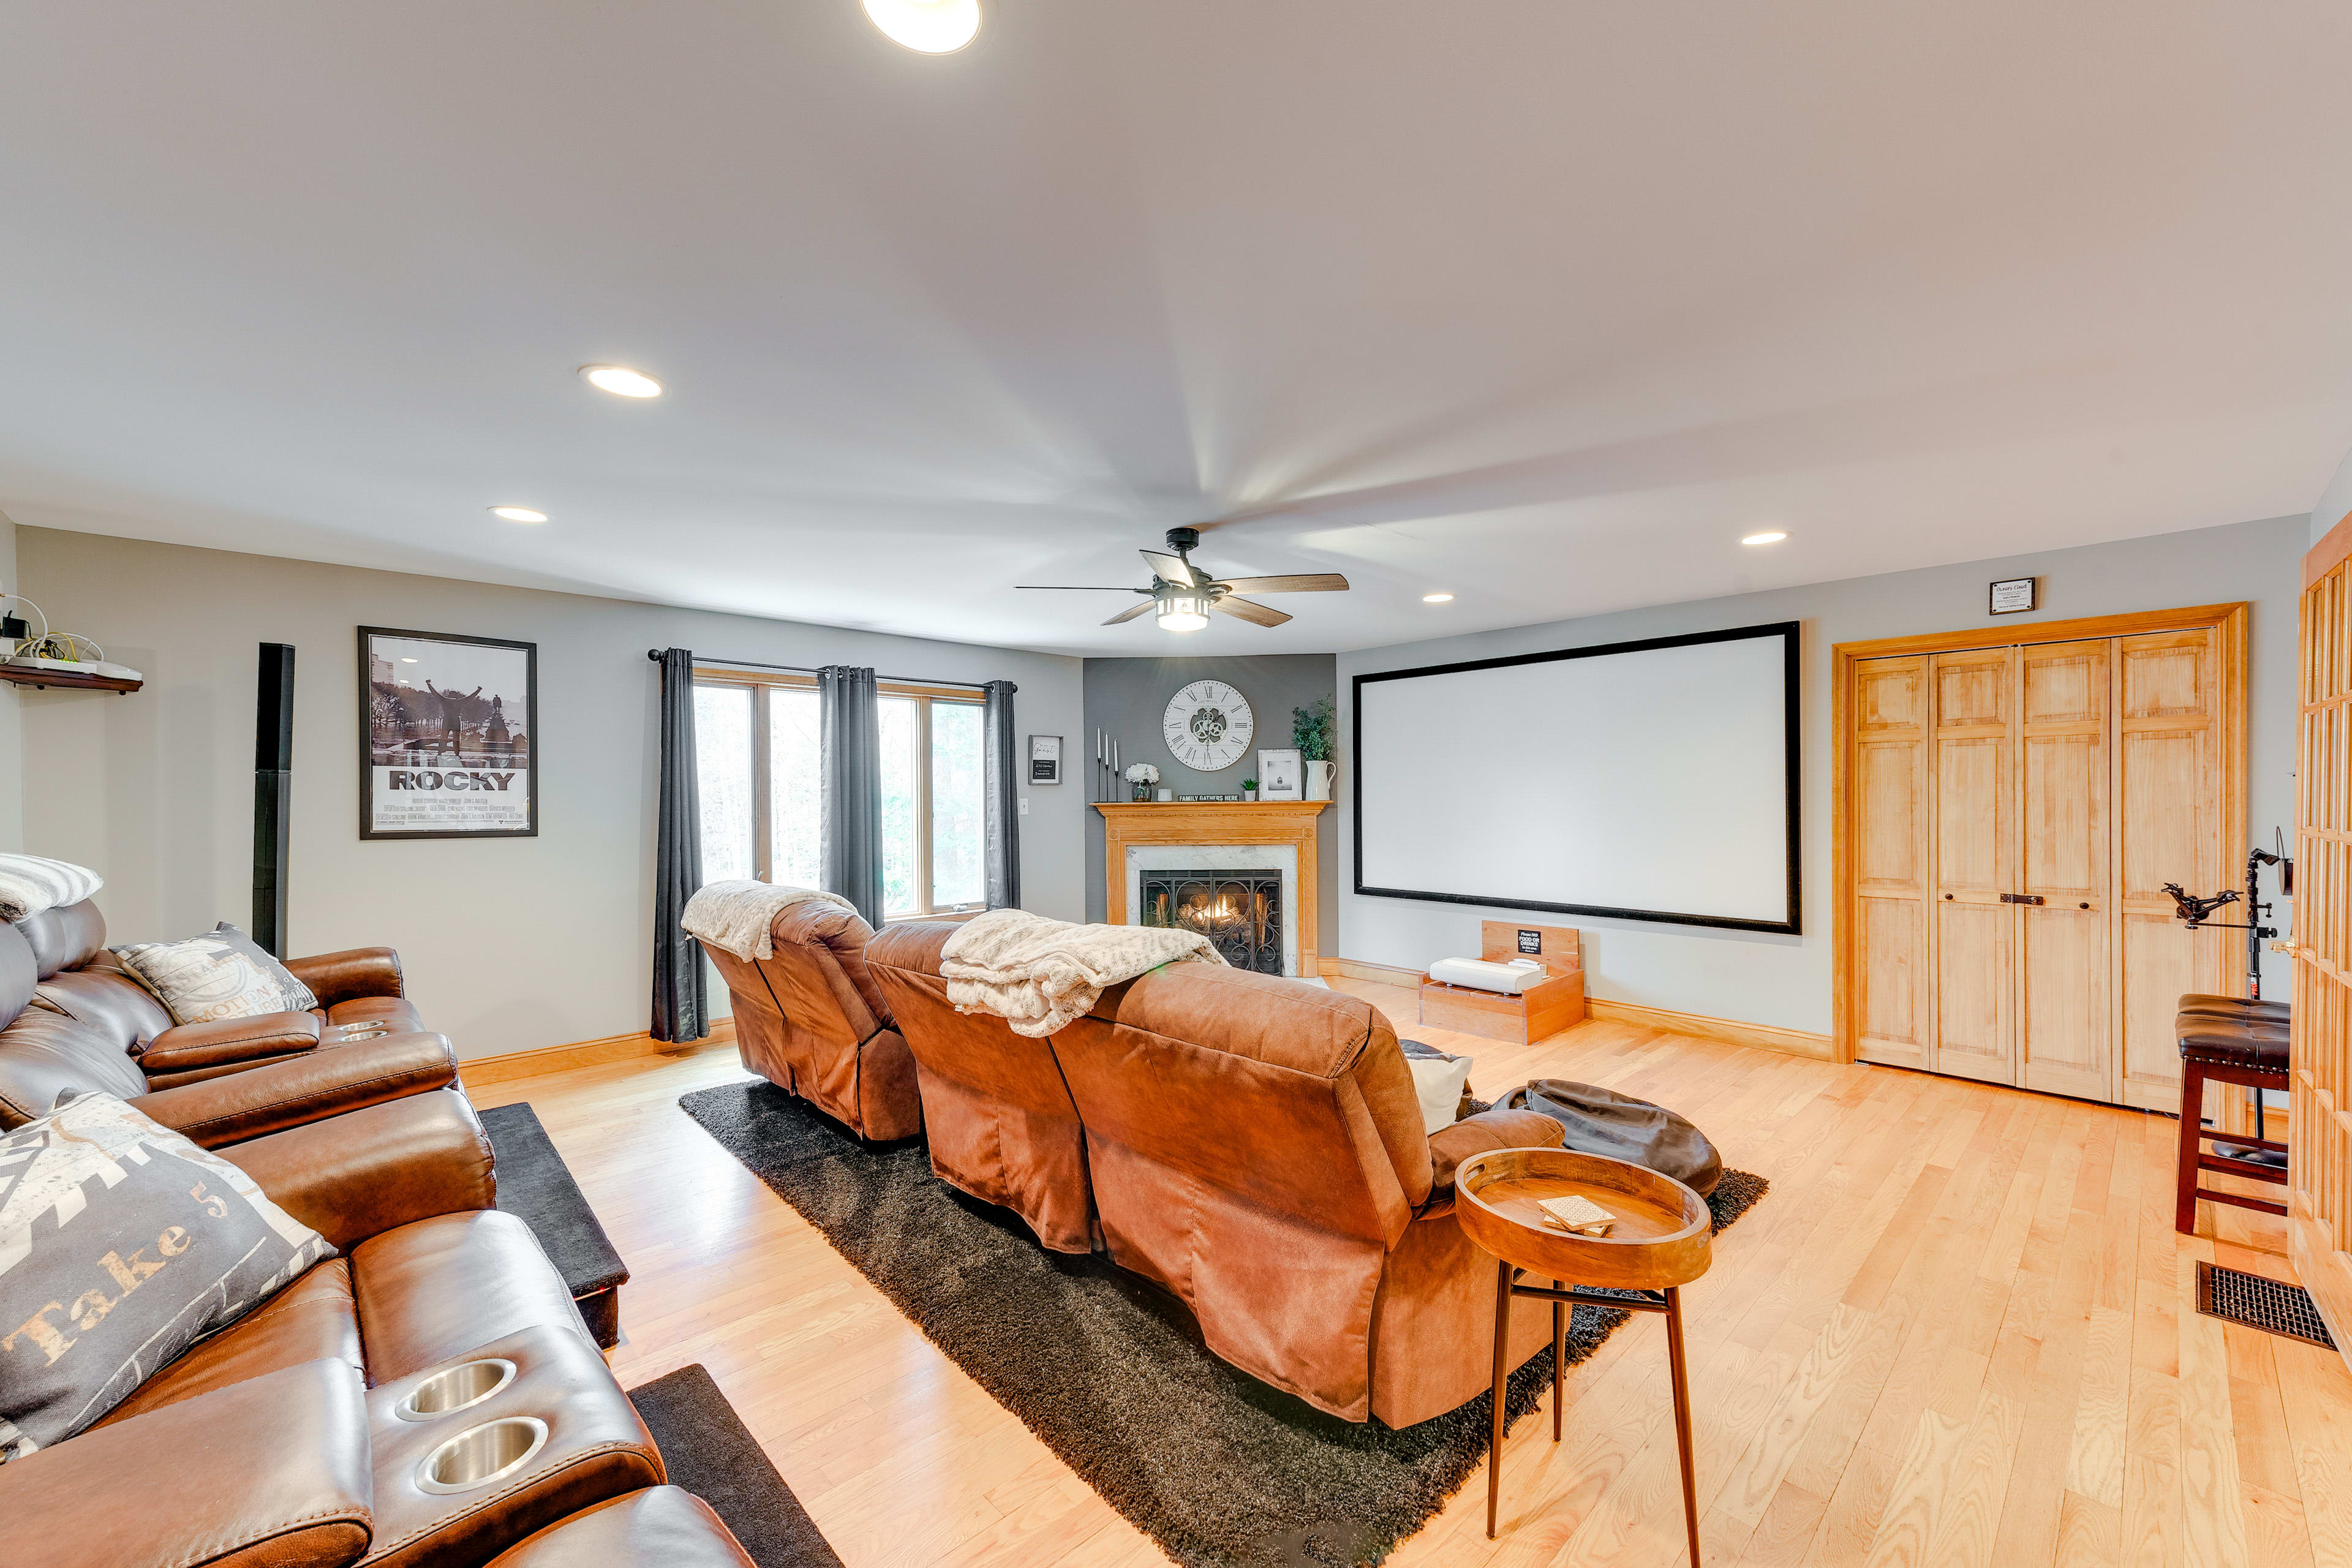 Home Theater | Fireplace | Projector Screen | Main Level